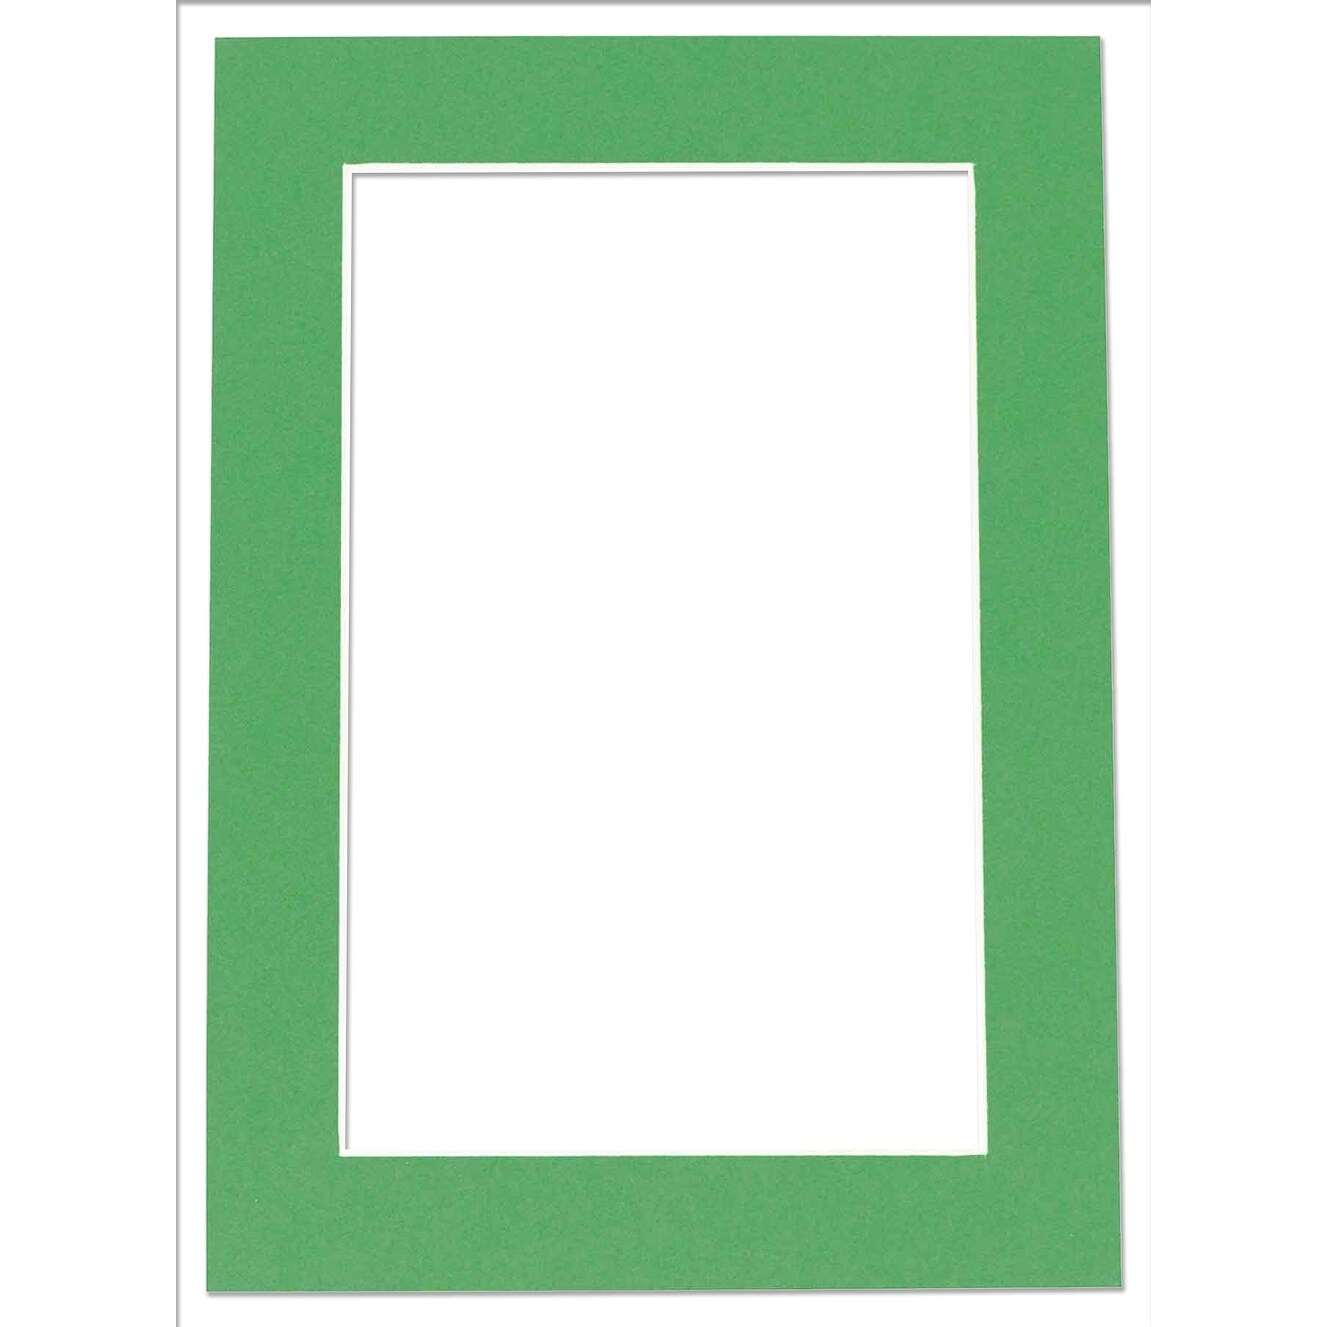 16x20 Mat Bevel Cut for 13x15 Photos - Acid Free Bright Green Precut  Matboard - For Pictures, Photos, Framing - Bed Bath & Beyond - 38467667